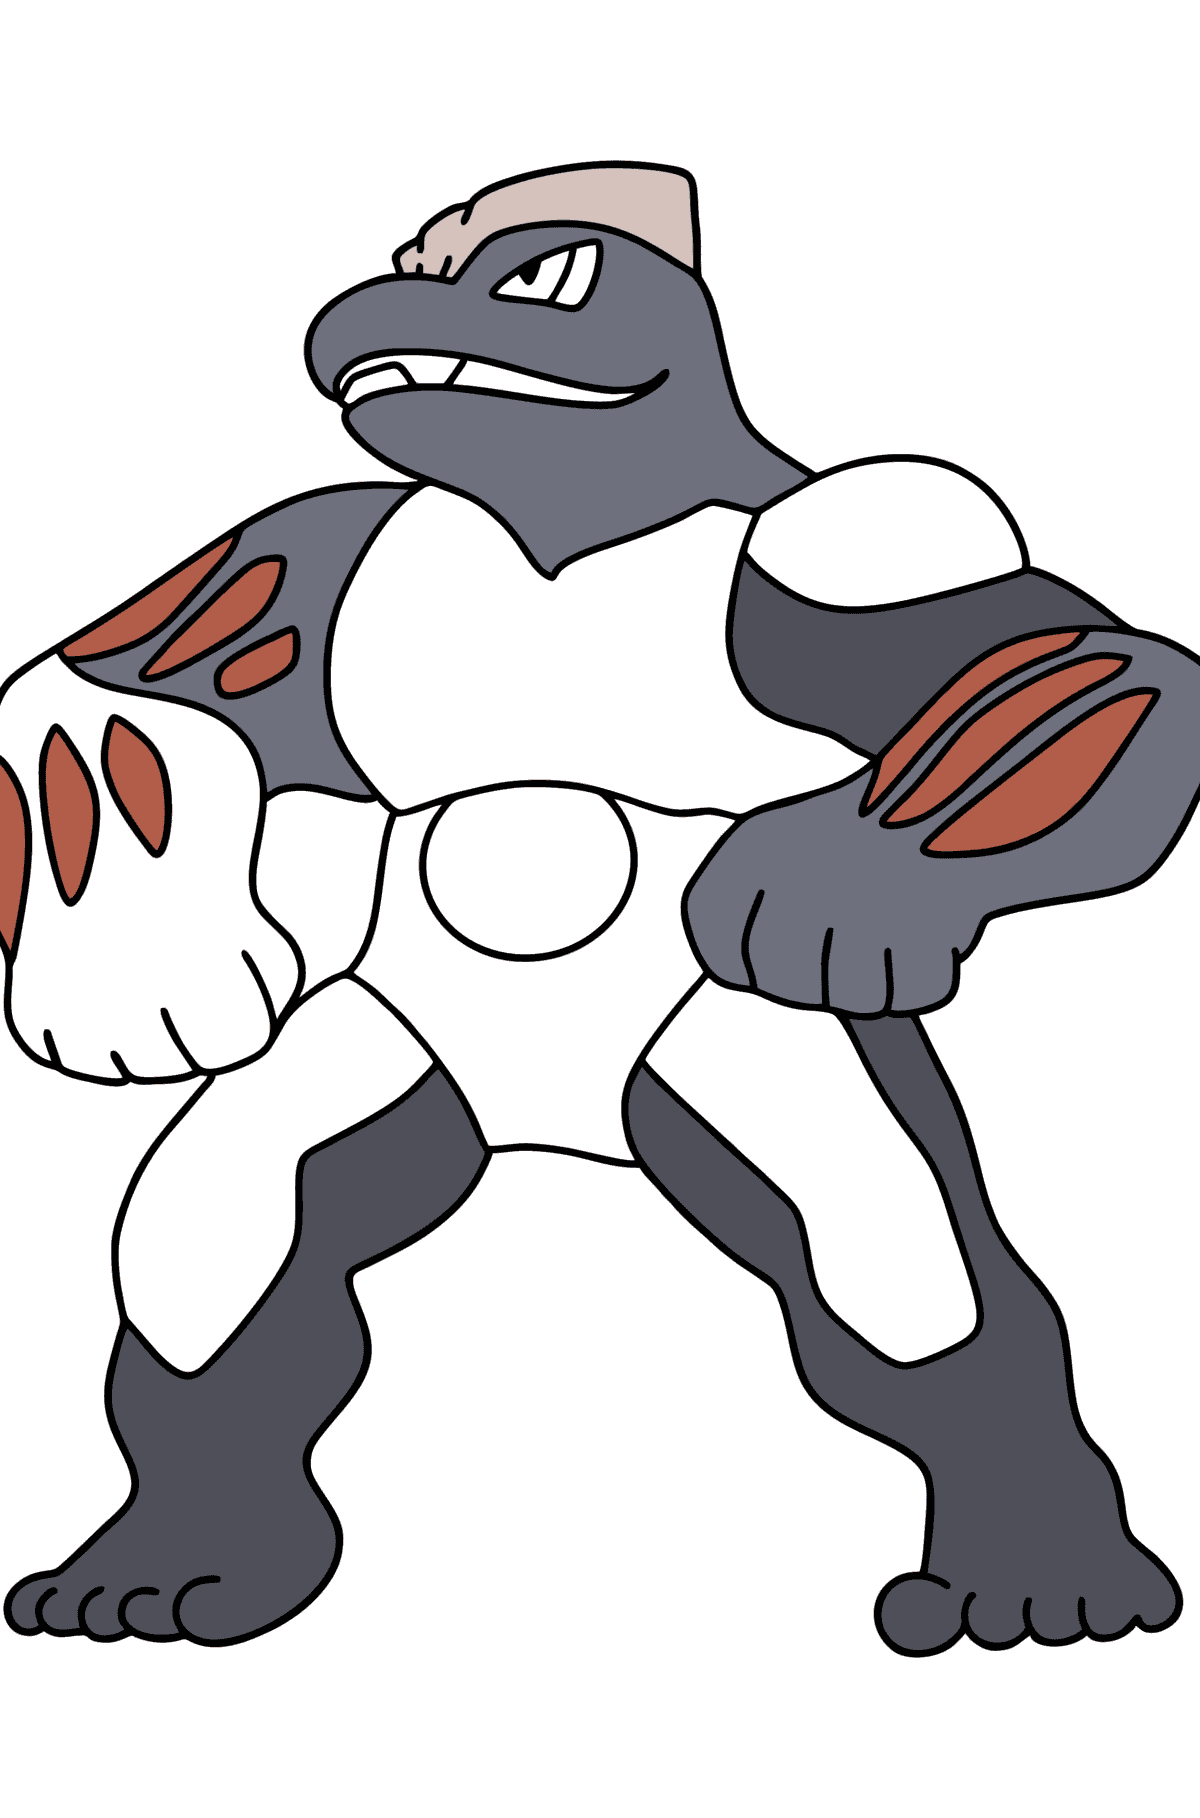 Coloring page Pokemon Go Machoke - Coloring Pages for Kids